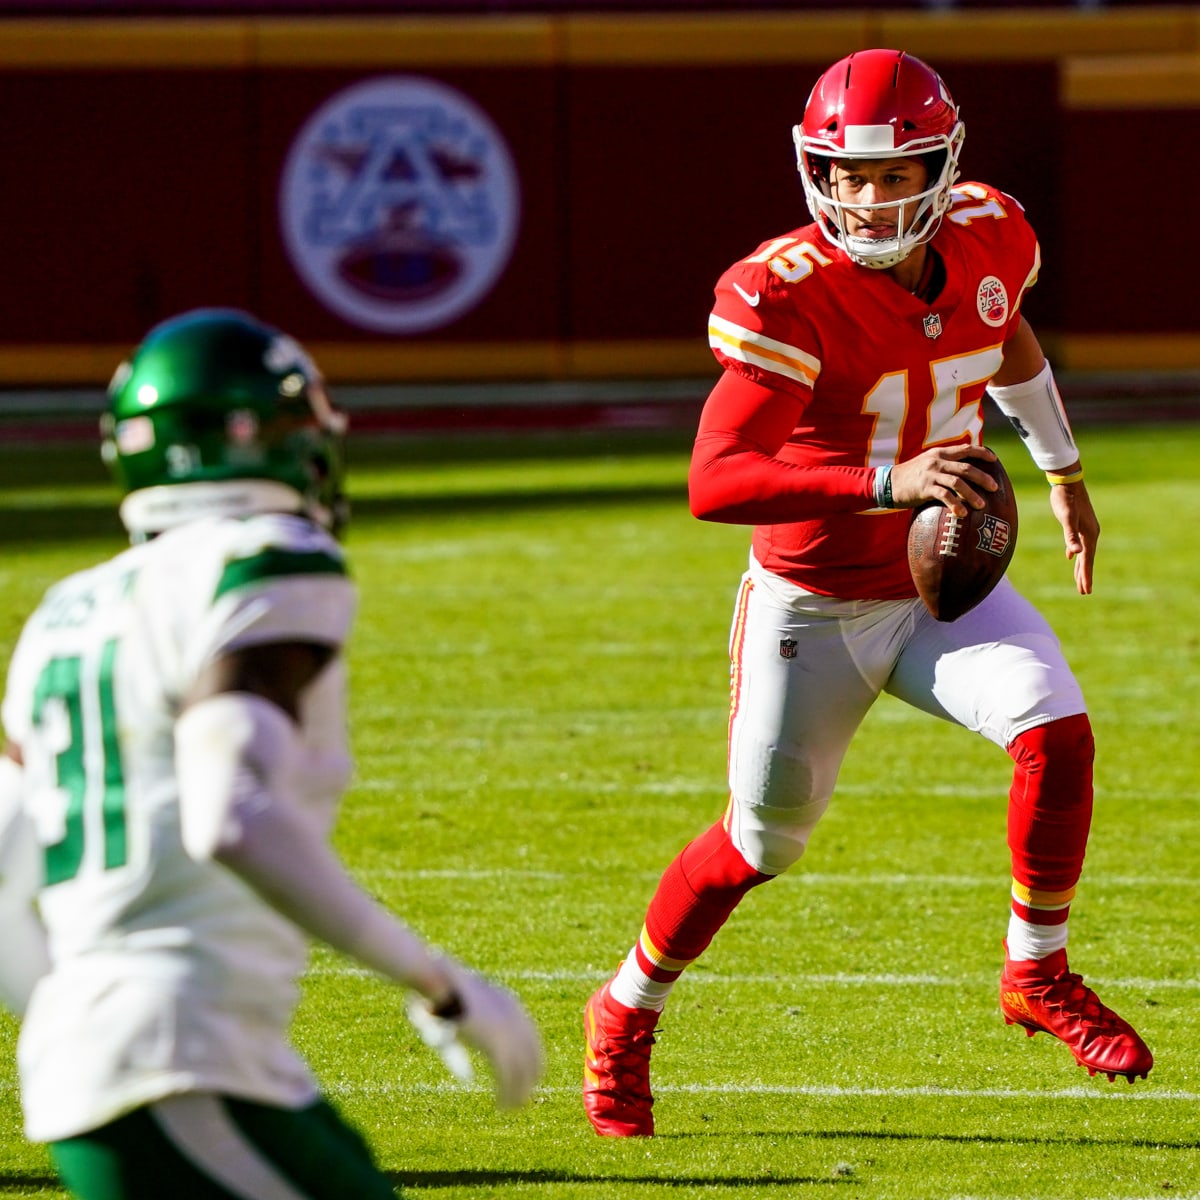 Best Bets for the Chiefs vs. Jets Sunday Night Football Game – NFL Week 4